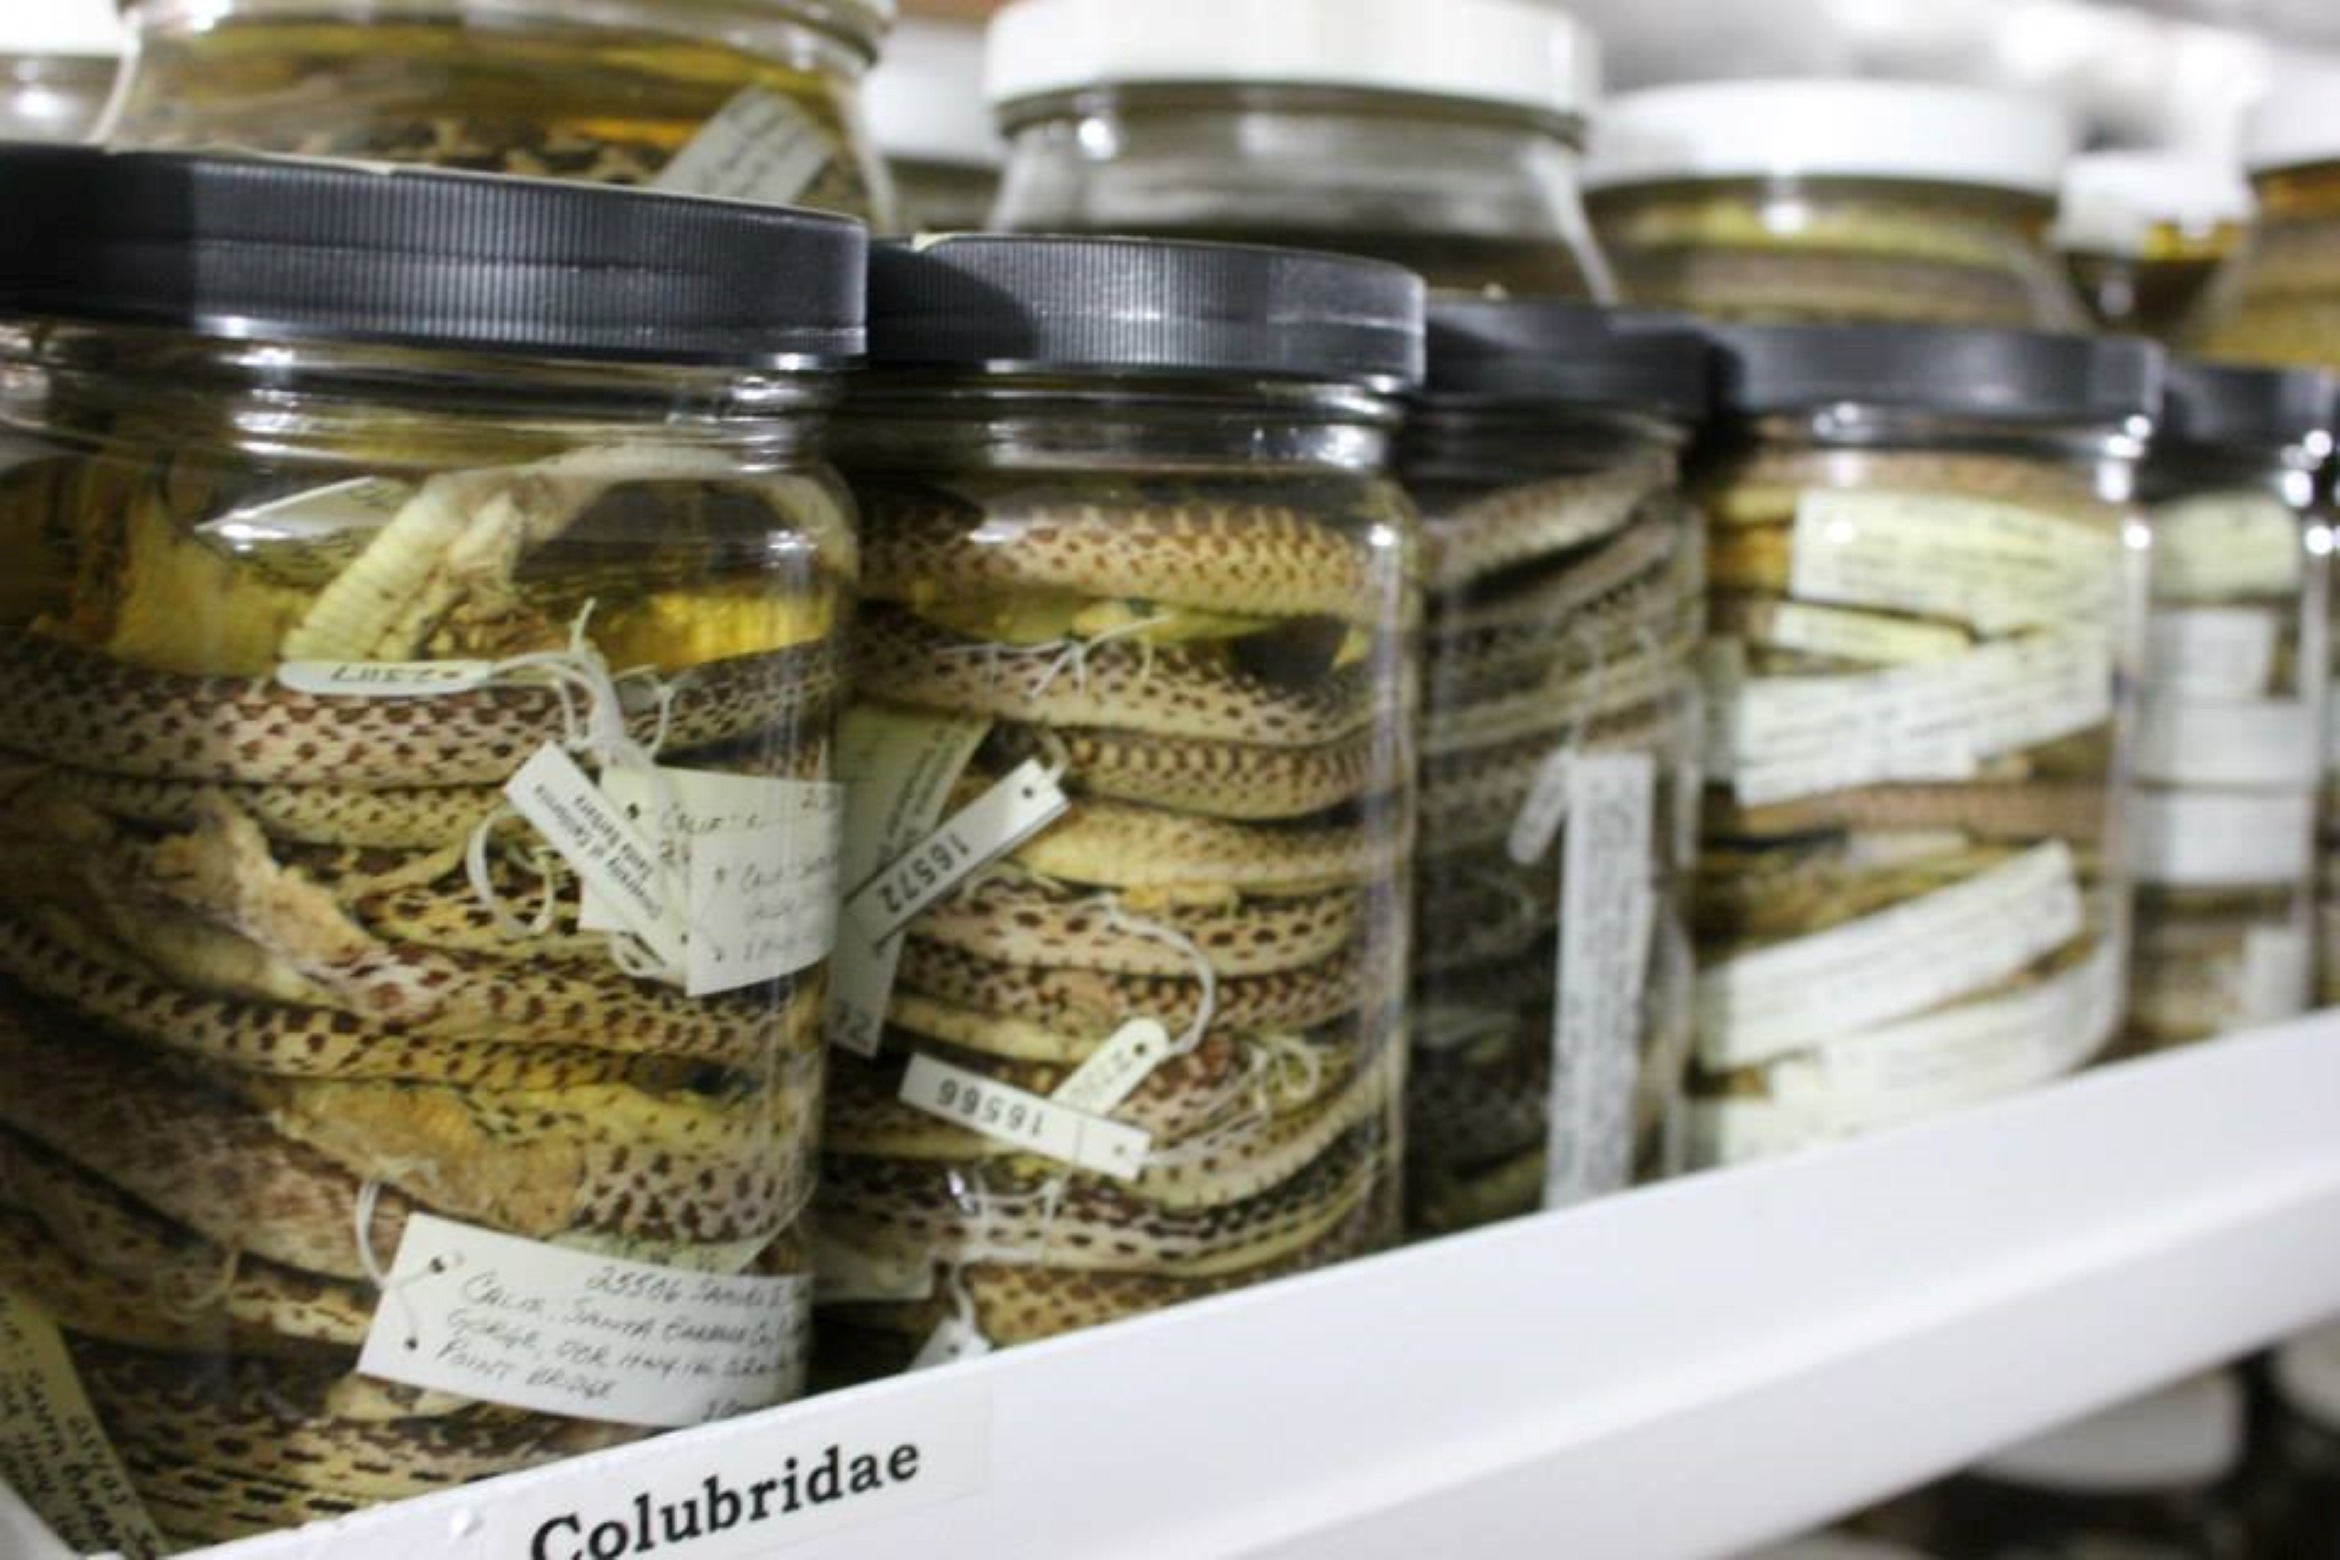 snakes in jars lined up on a shelf like pickles